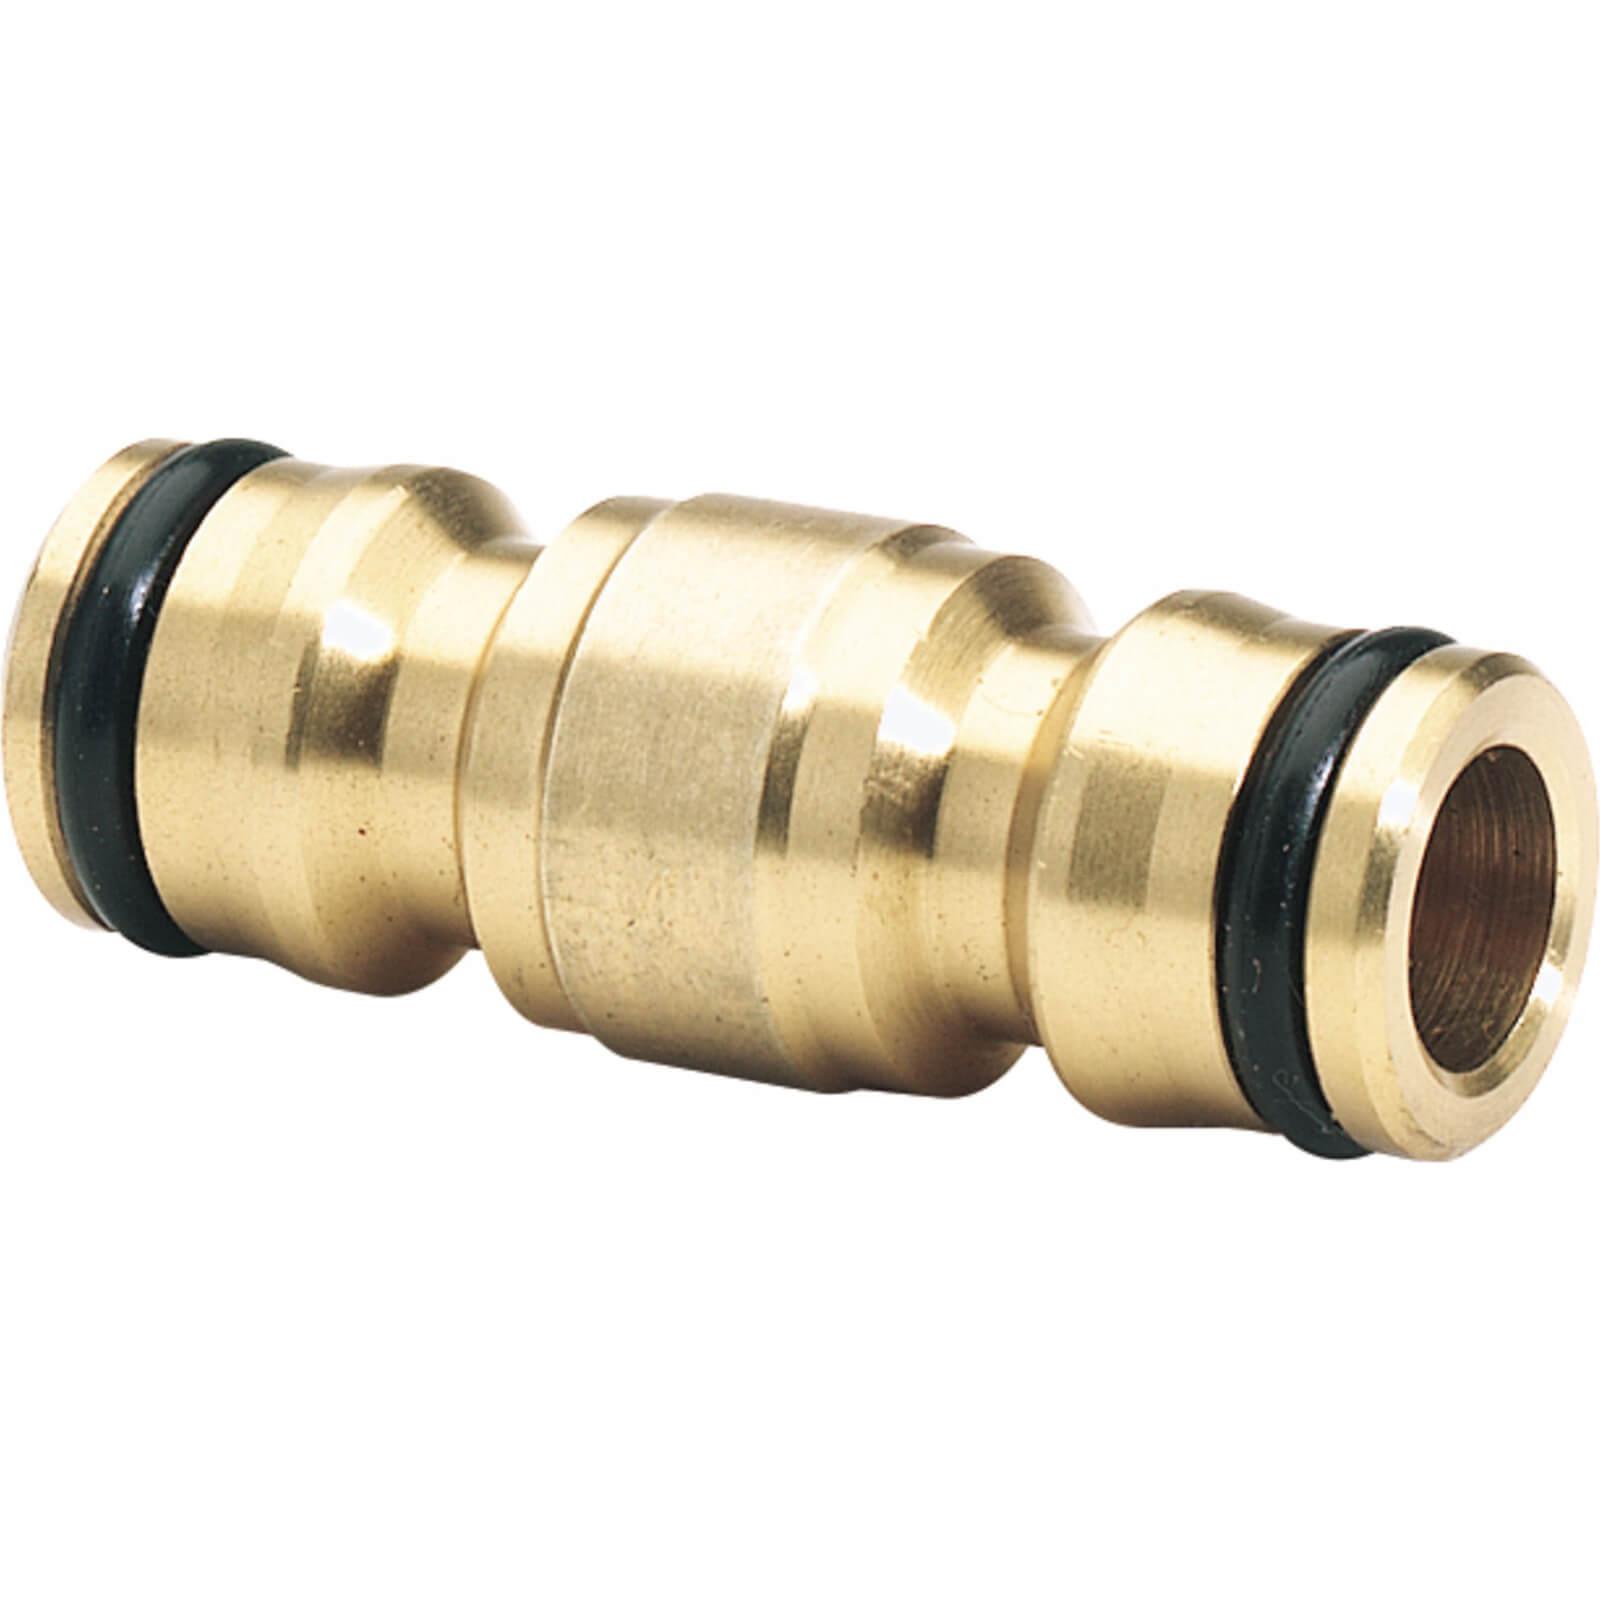 Image of Draper Expert Two Way Garden Hose Pipe Coupling Connector 1/2" / 12.5mm